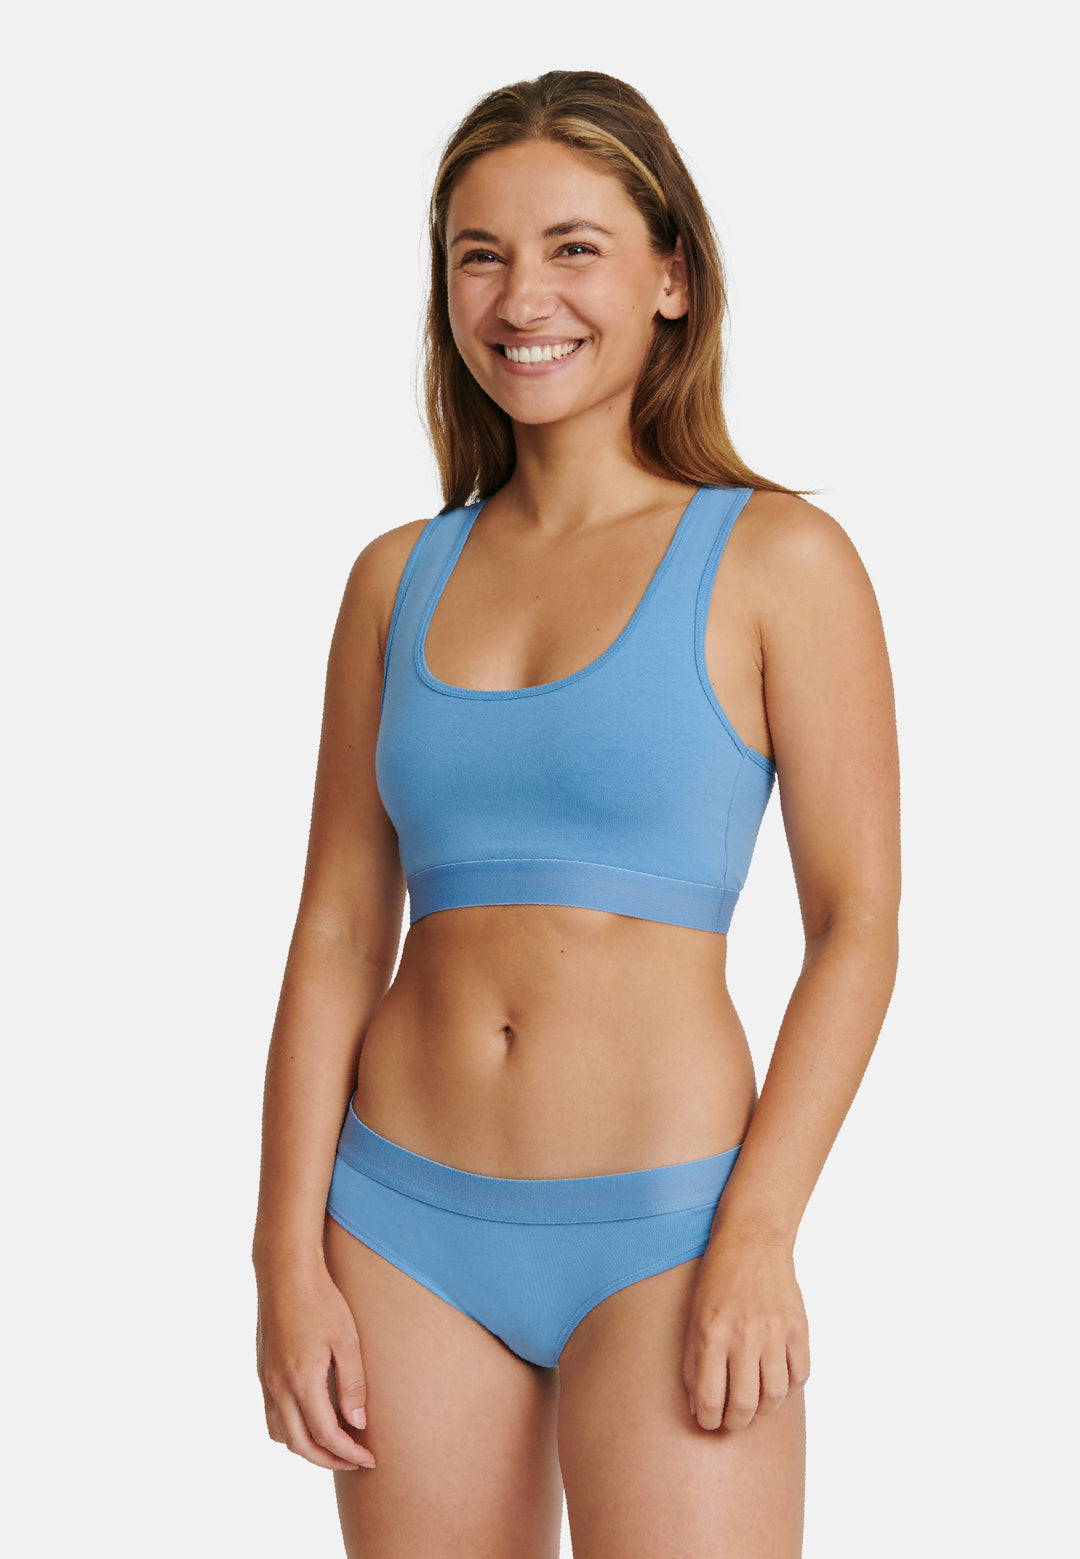 Women's Everyday Classic Fit Bikini 6-pack made with Organic Cotton